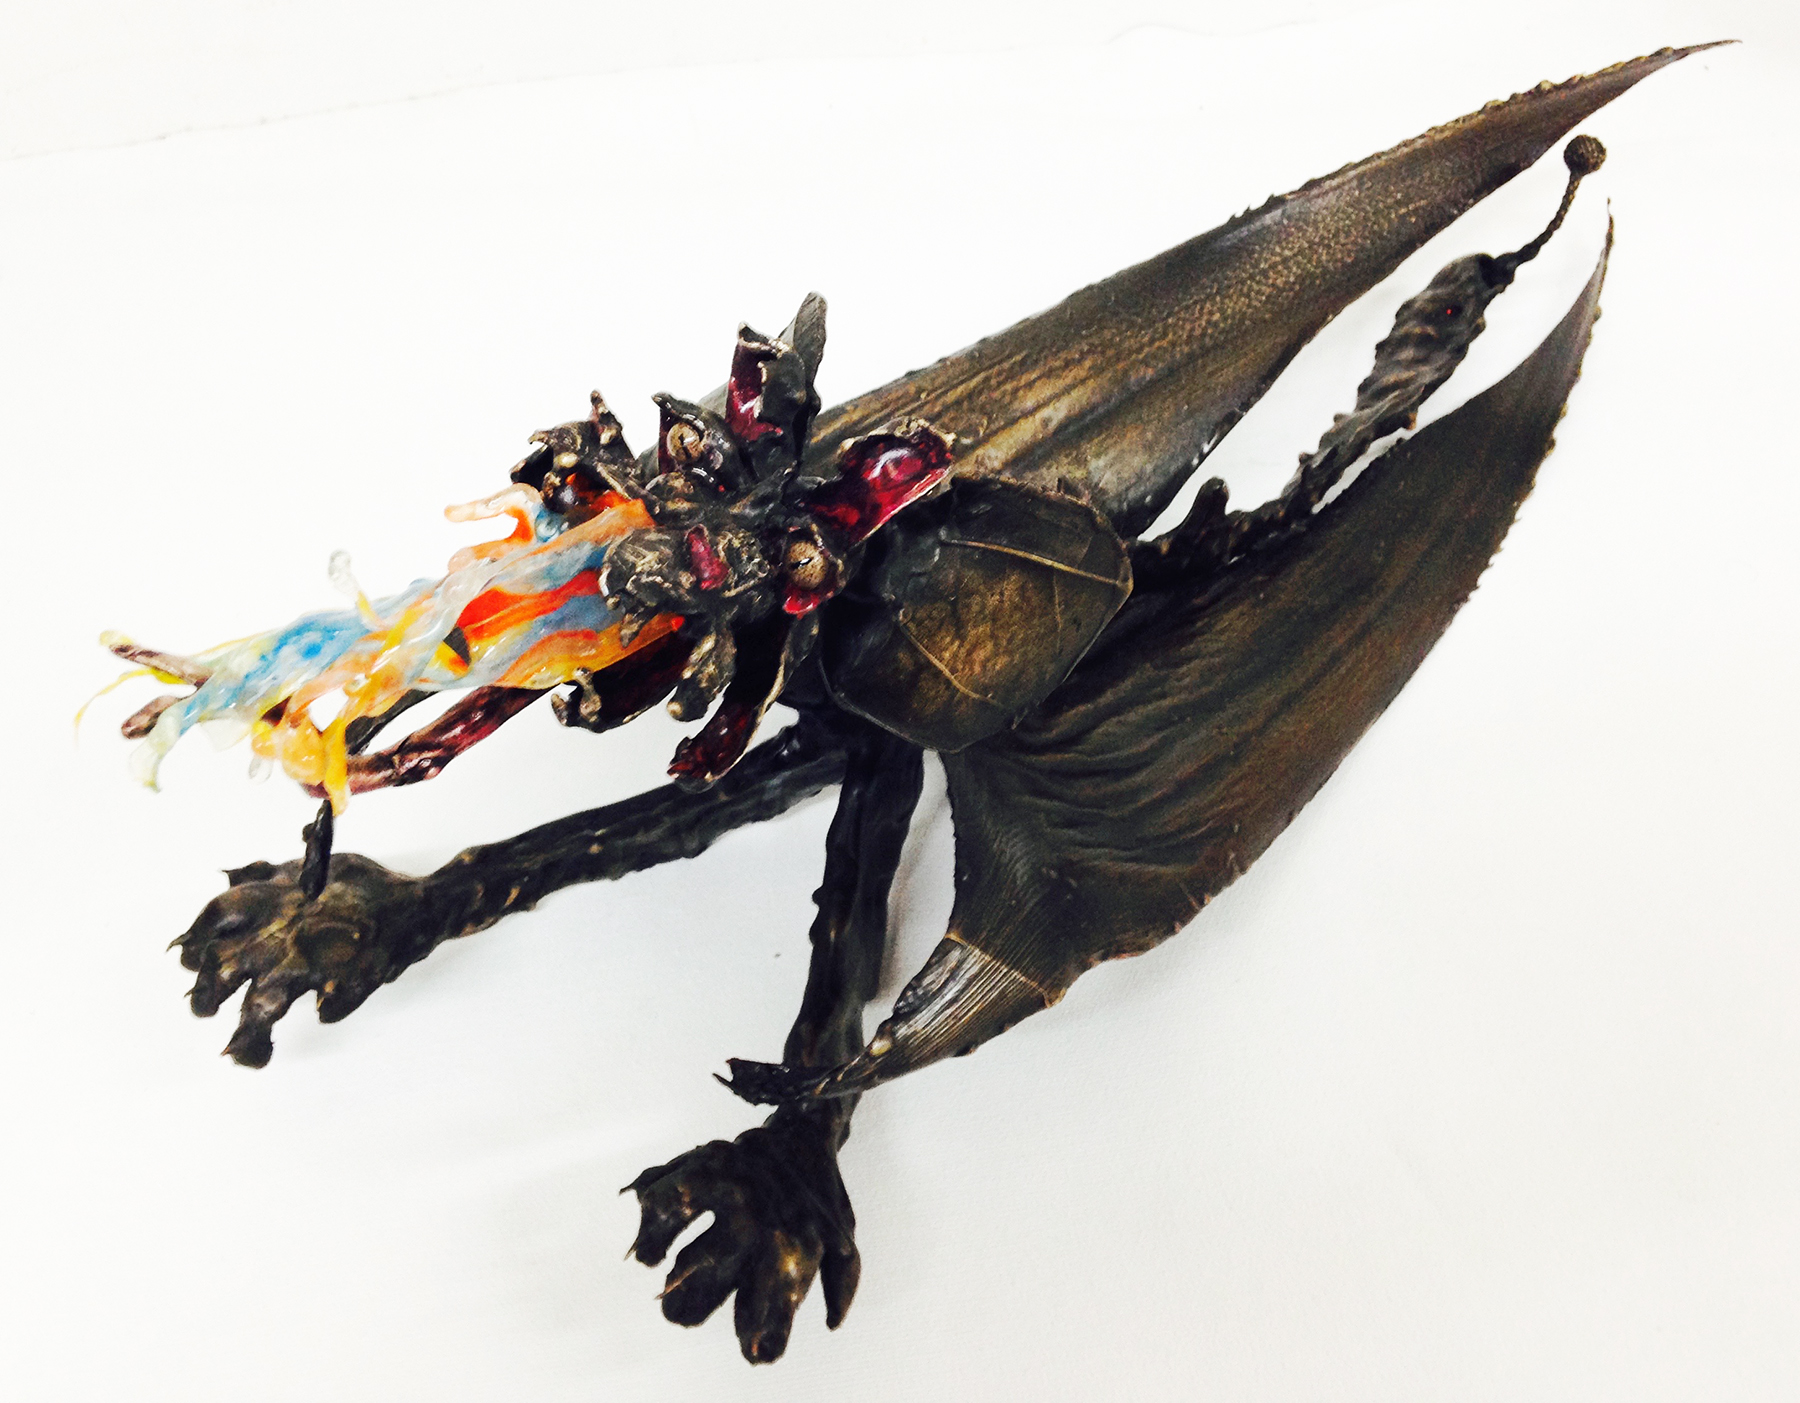  &nbsp;"Big Flame Dragon" Free standing Bronze sculpture with mixed media. H 6.5" x W 5.5" x L 18" $6,000.00       